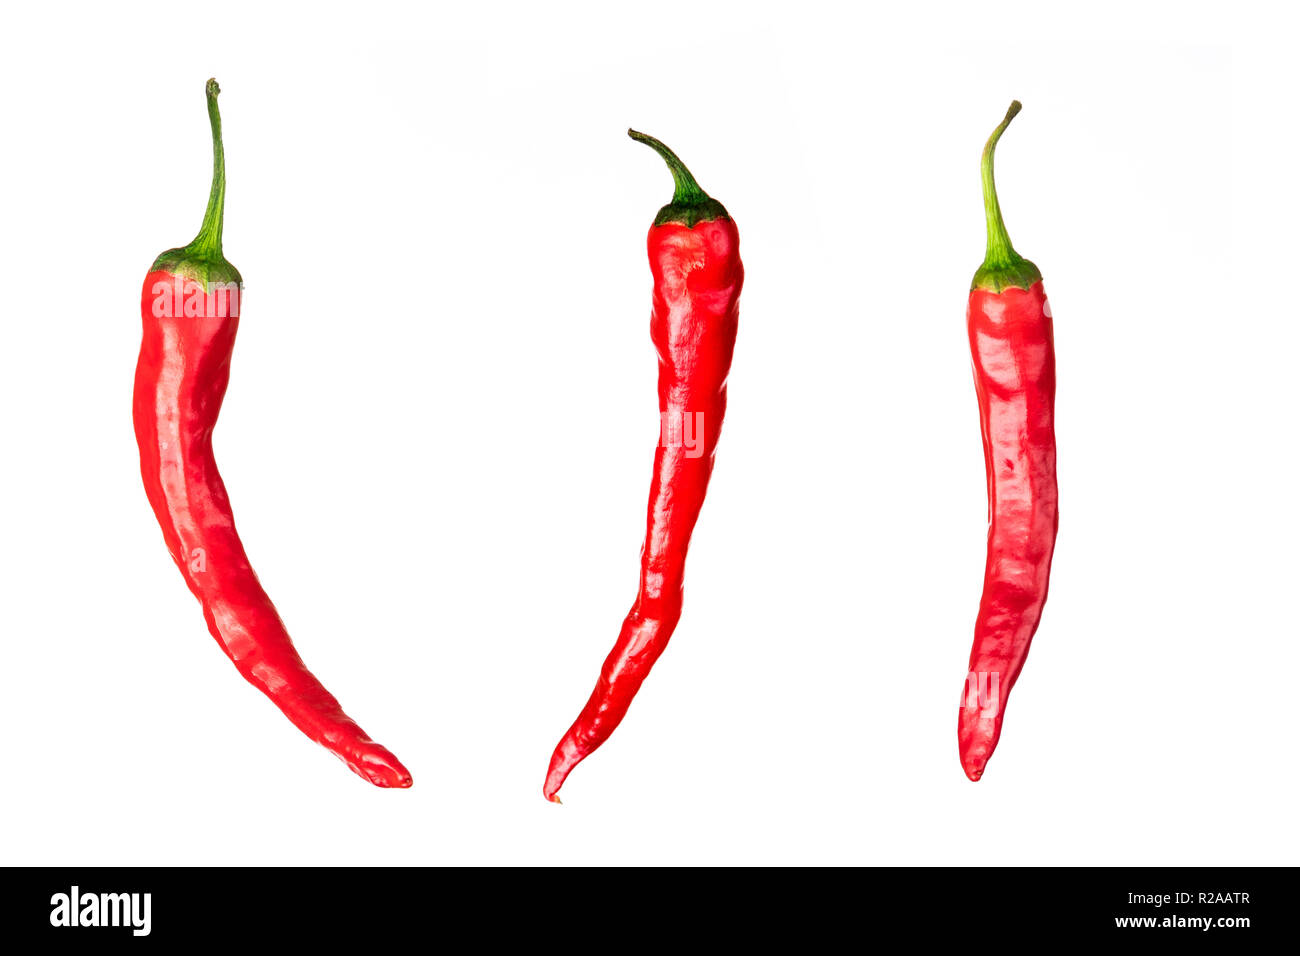 three pieces of red chili peppers isolated on white background Stock Photo